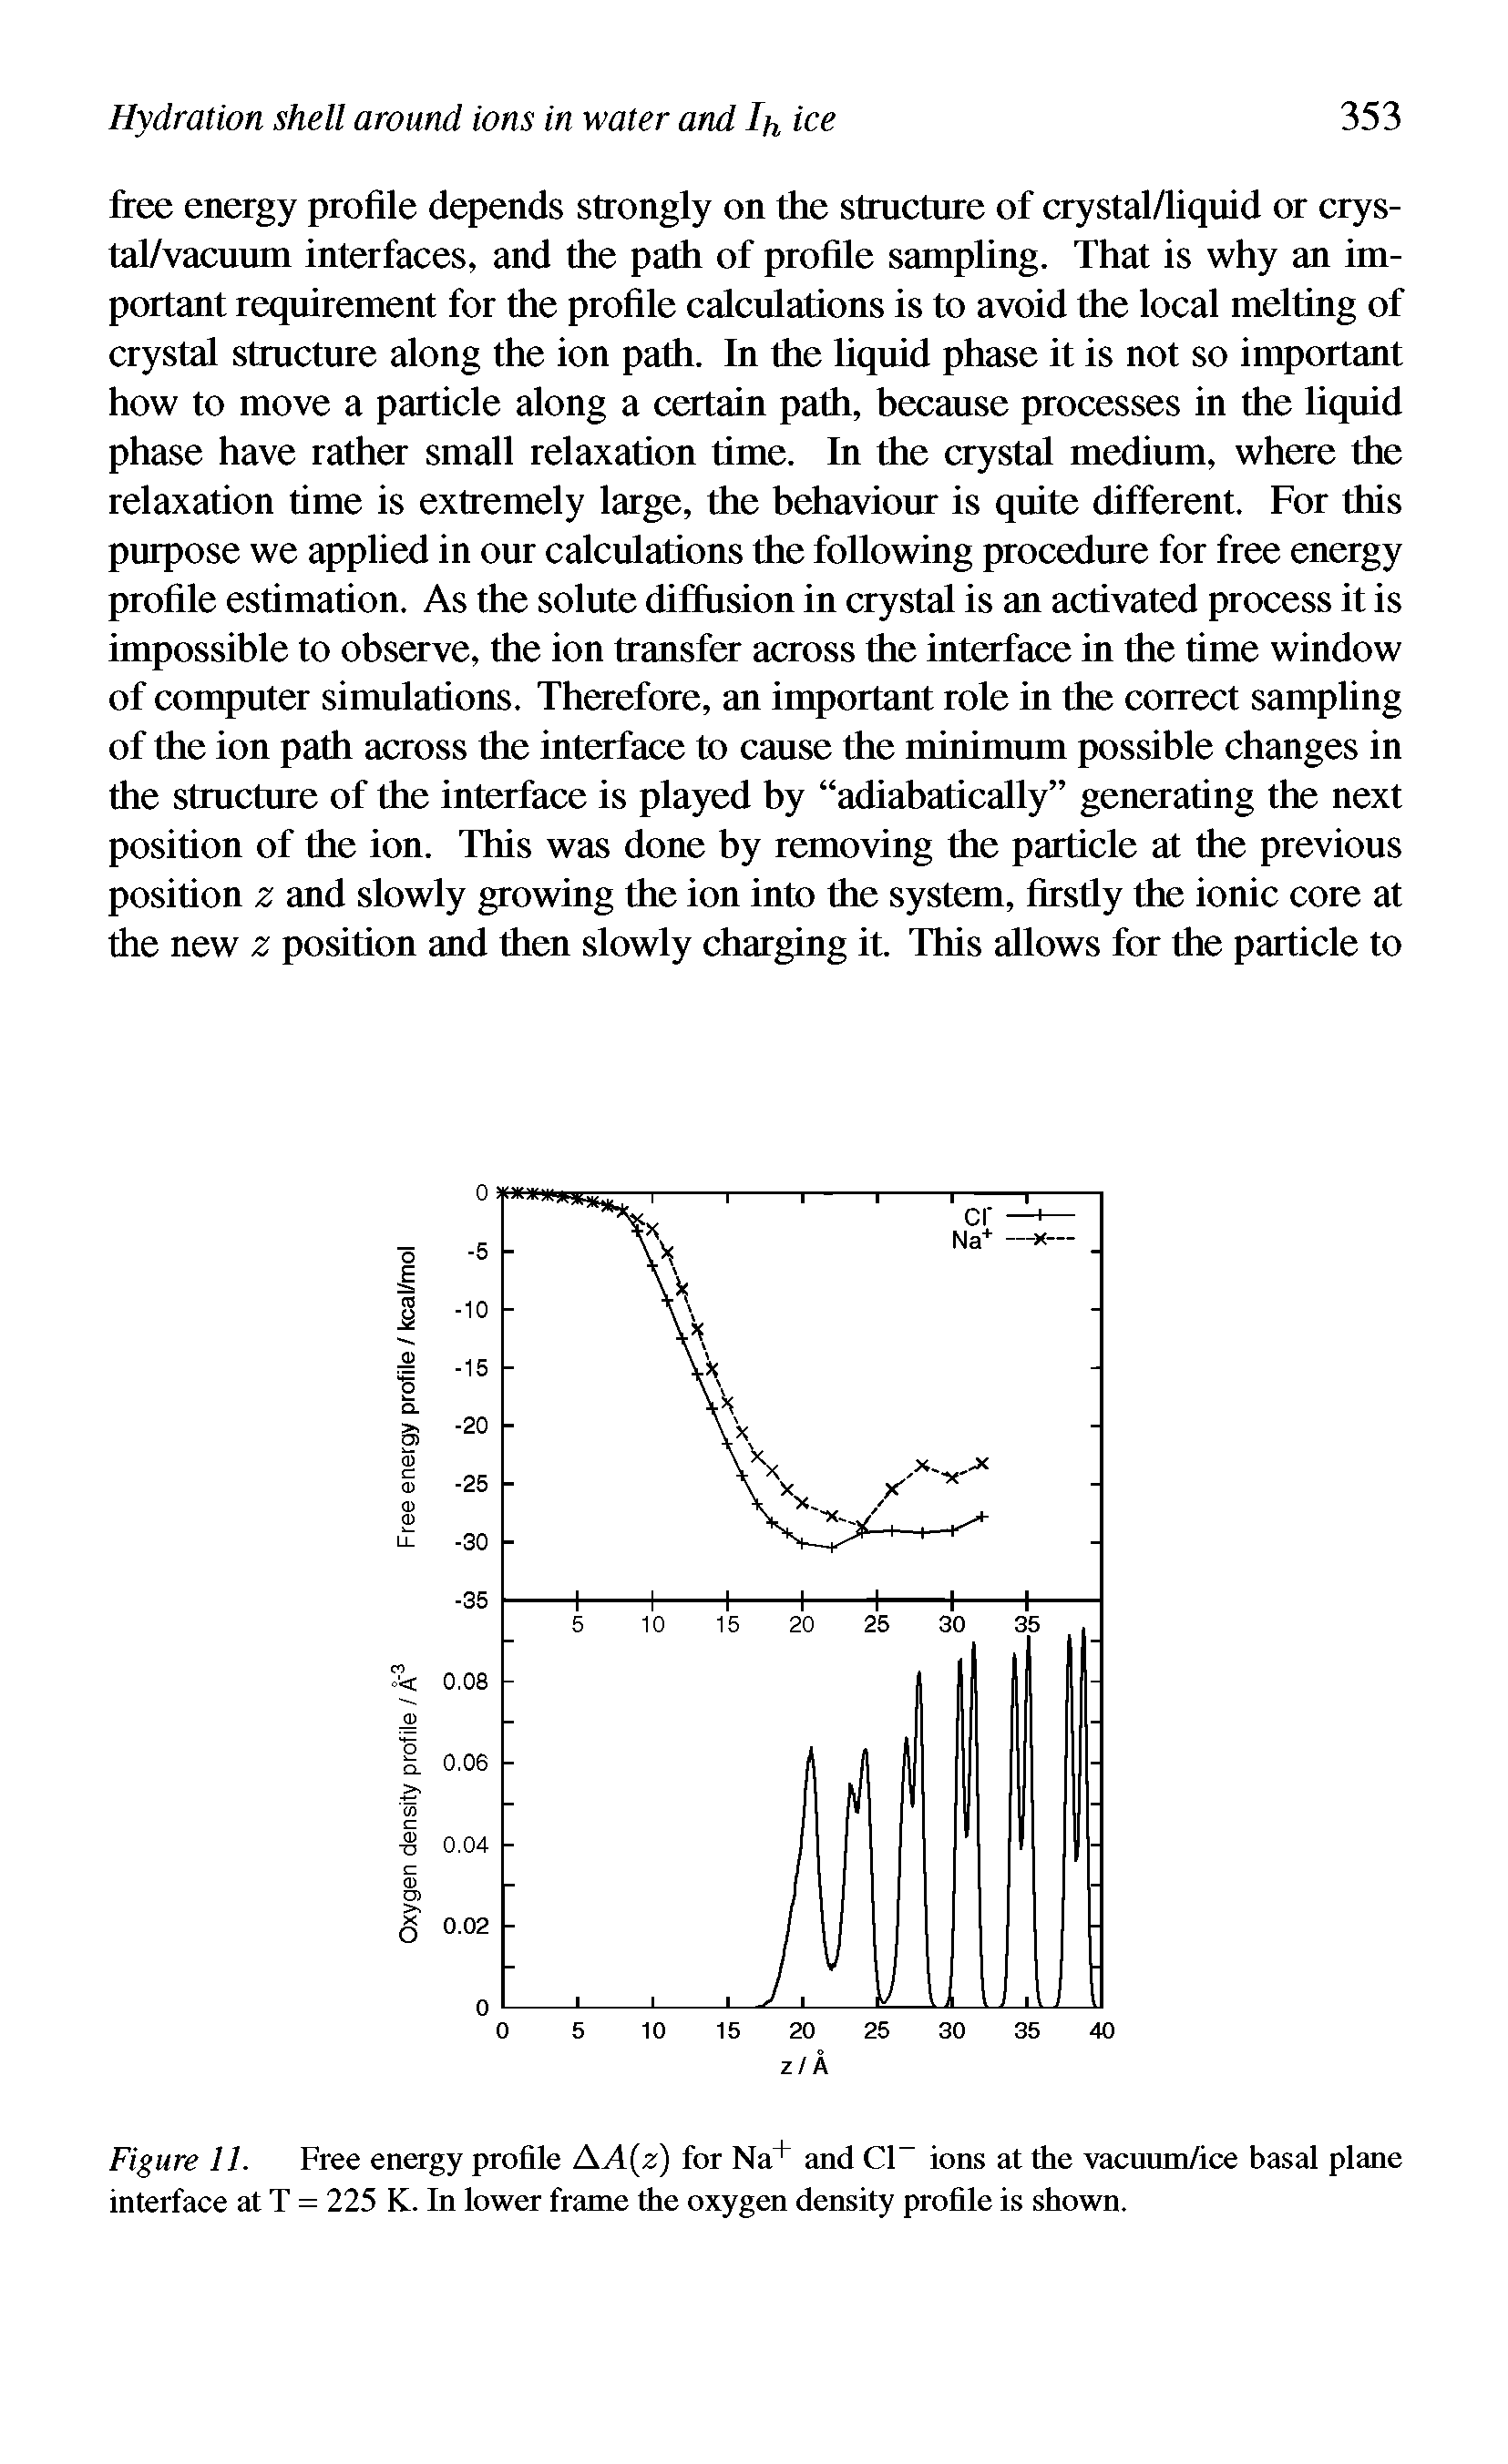 Figure 11. Free energy profile AA(z) for Na+ and Cl ions at the vacuum/ice basal plane interface at T = 225 K. In lower frame the oxygen density profile is shown.